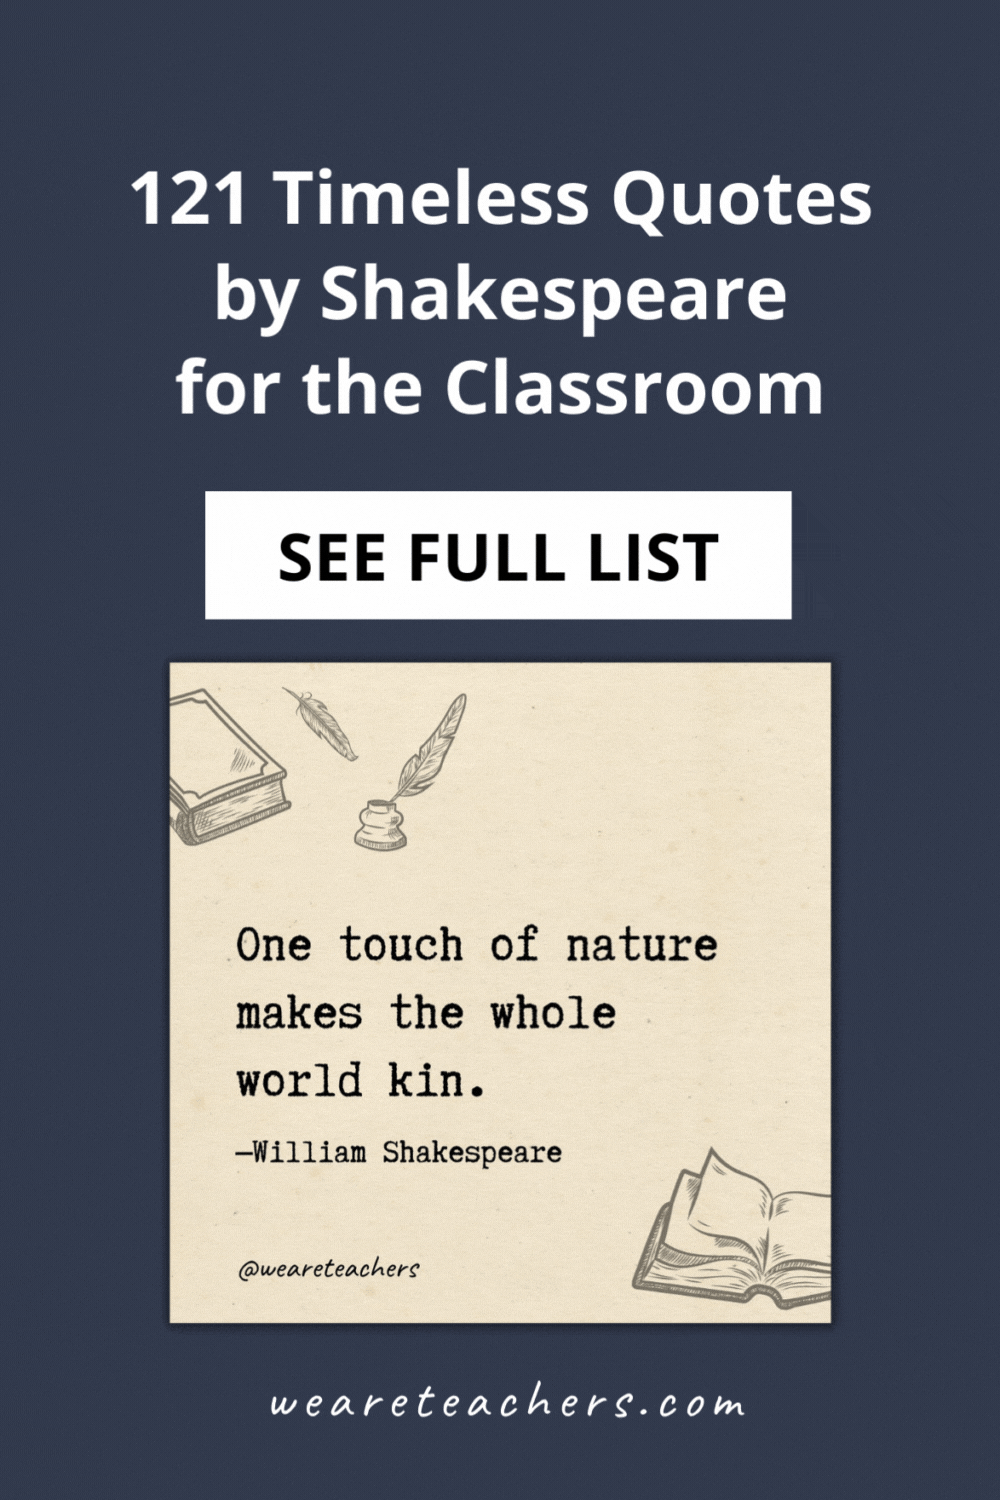 These timeless Shakespeare quotes will be relevant and meaningful to your students and are perfect for sharing in the classroom.